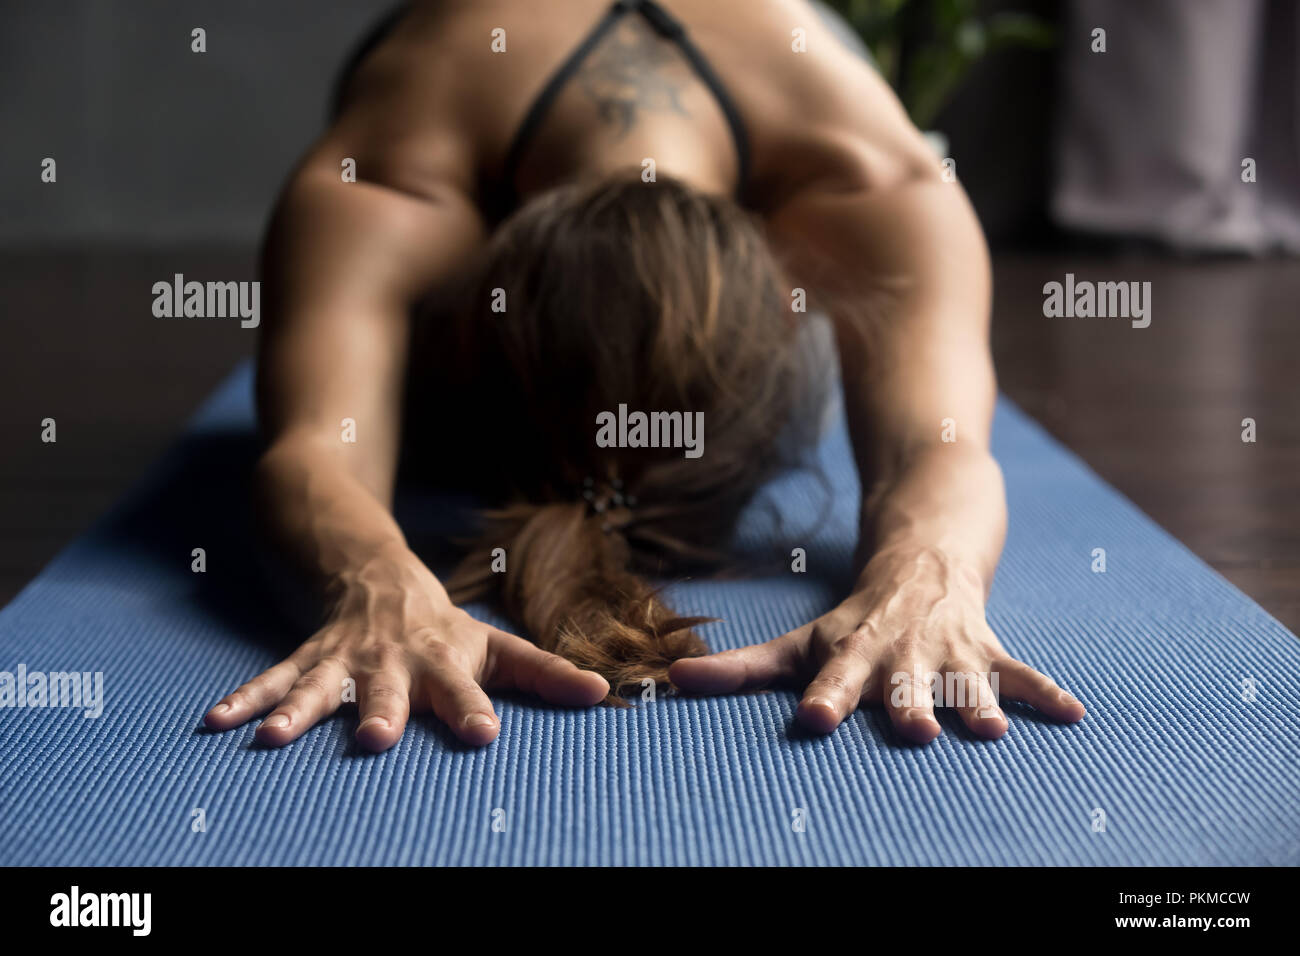 Young sporty woman in Balasana pose, close up view Stock Photo